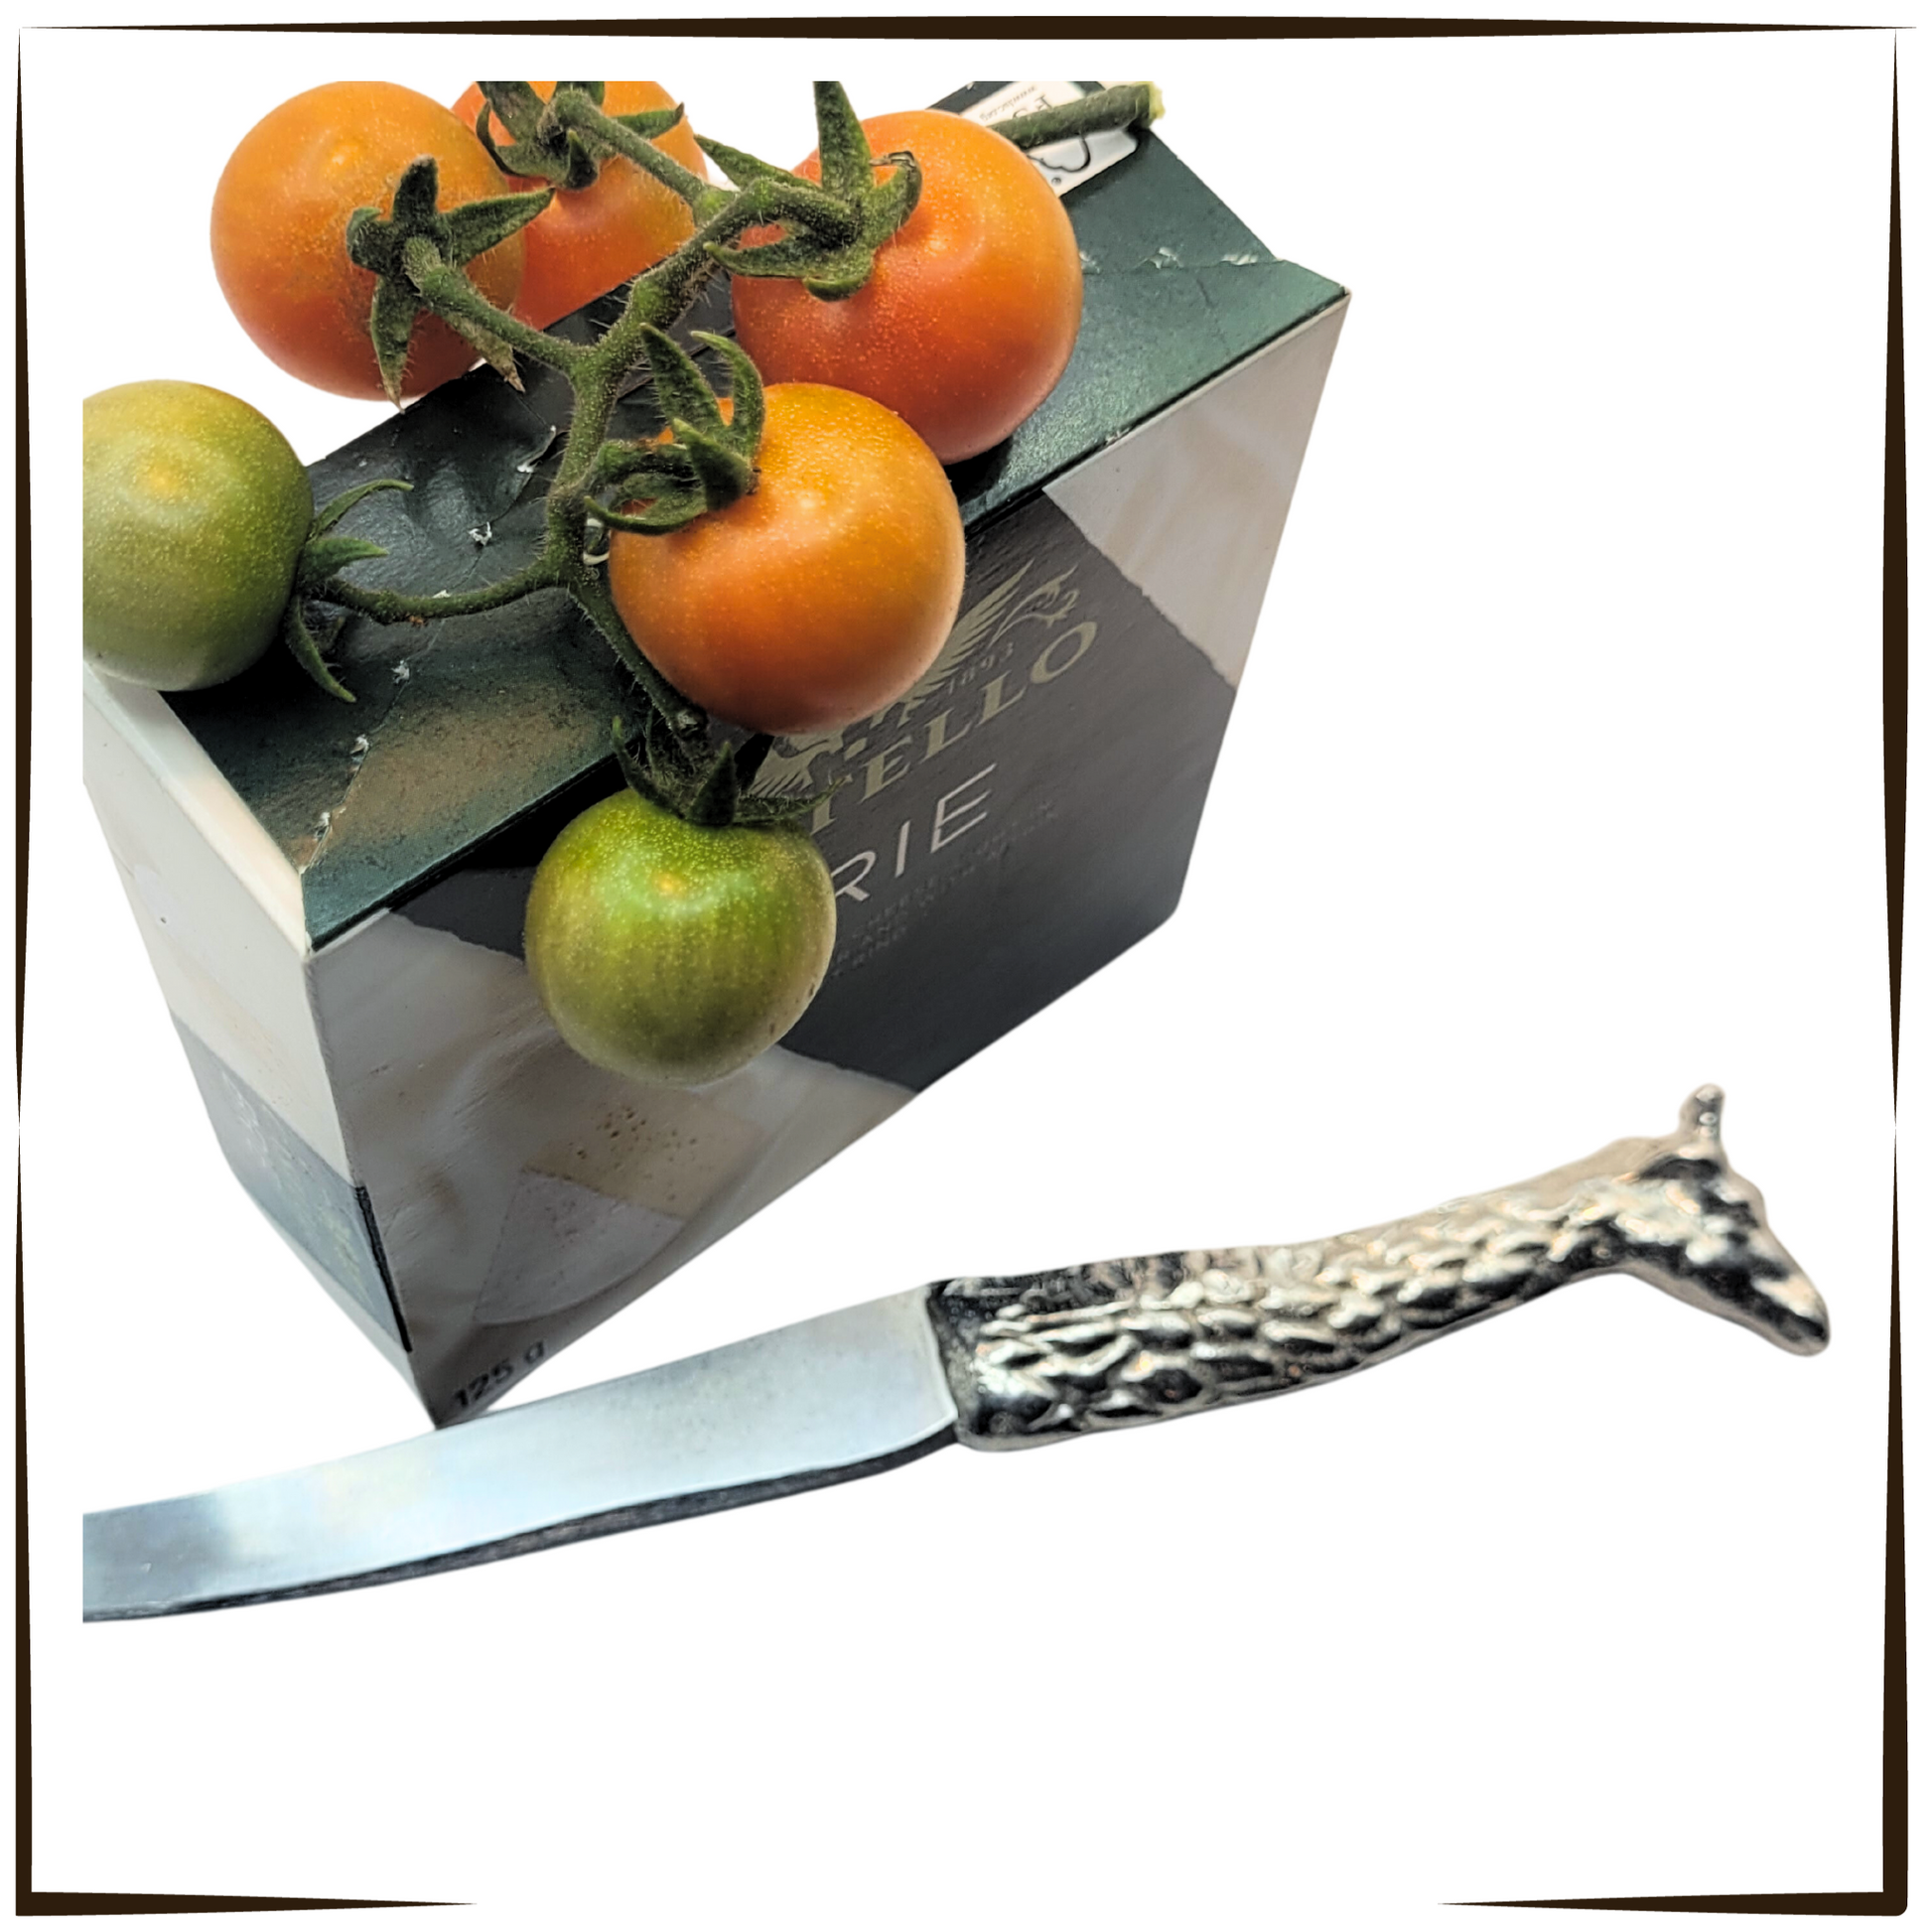 Pewter - Elegant Giraffe Cheese Knife With Stainless Steel Blade